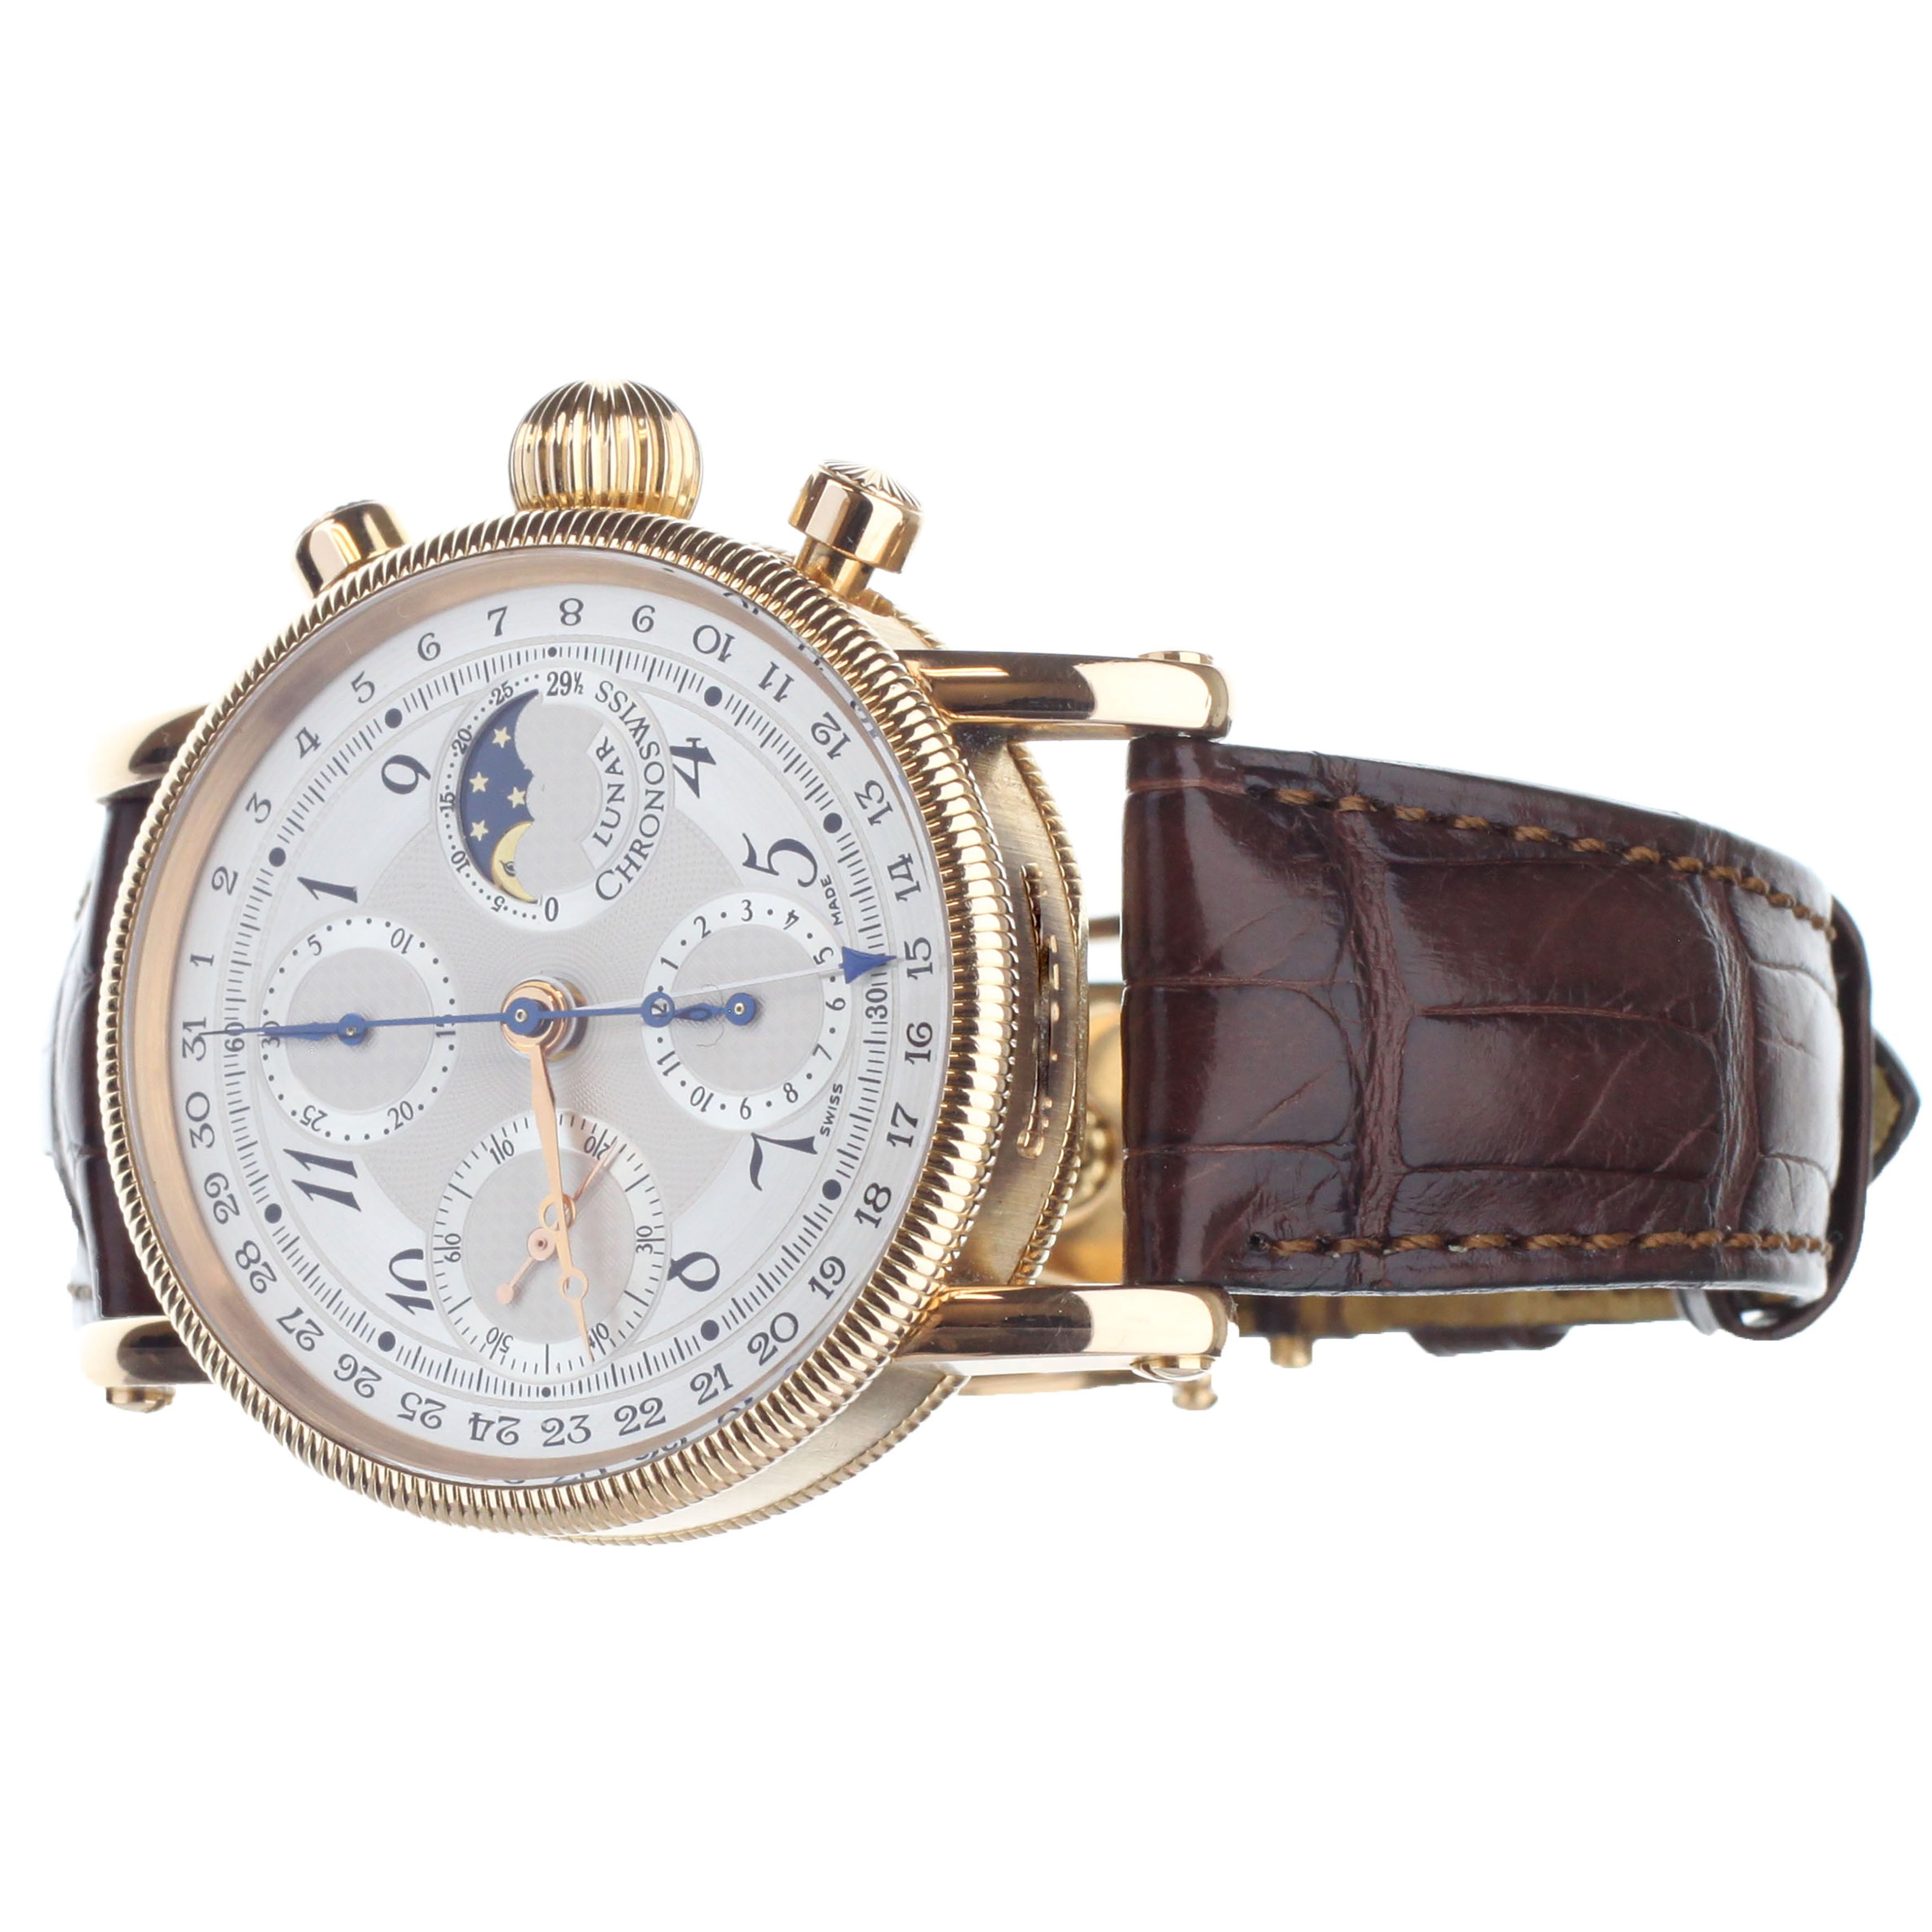 CHRONOSWISS OPUS CHRONOGRAPH POINTER DATE MOONPHASE ROSE GOLD 7522R FULL SET